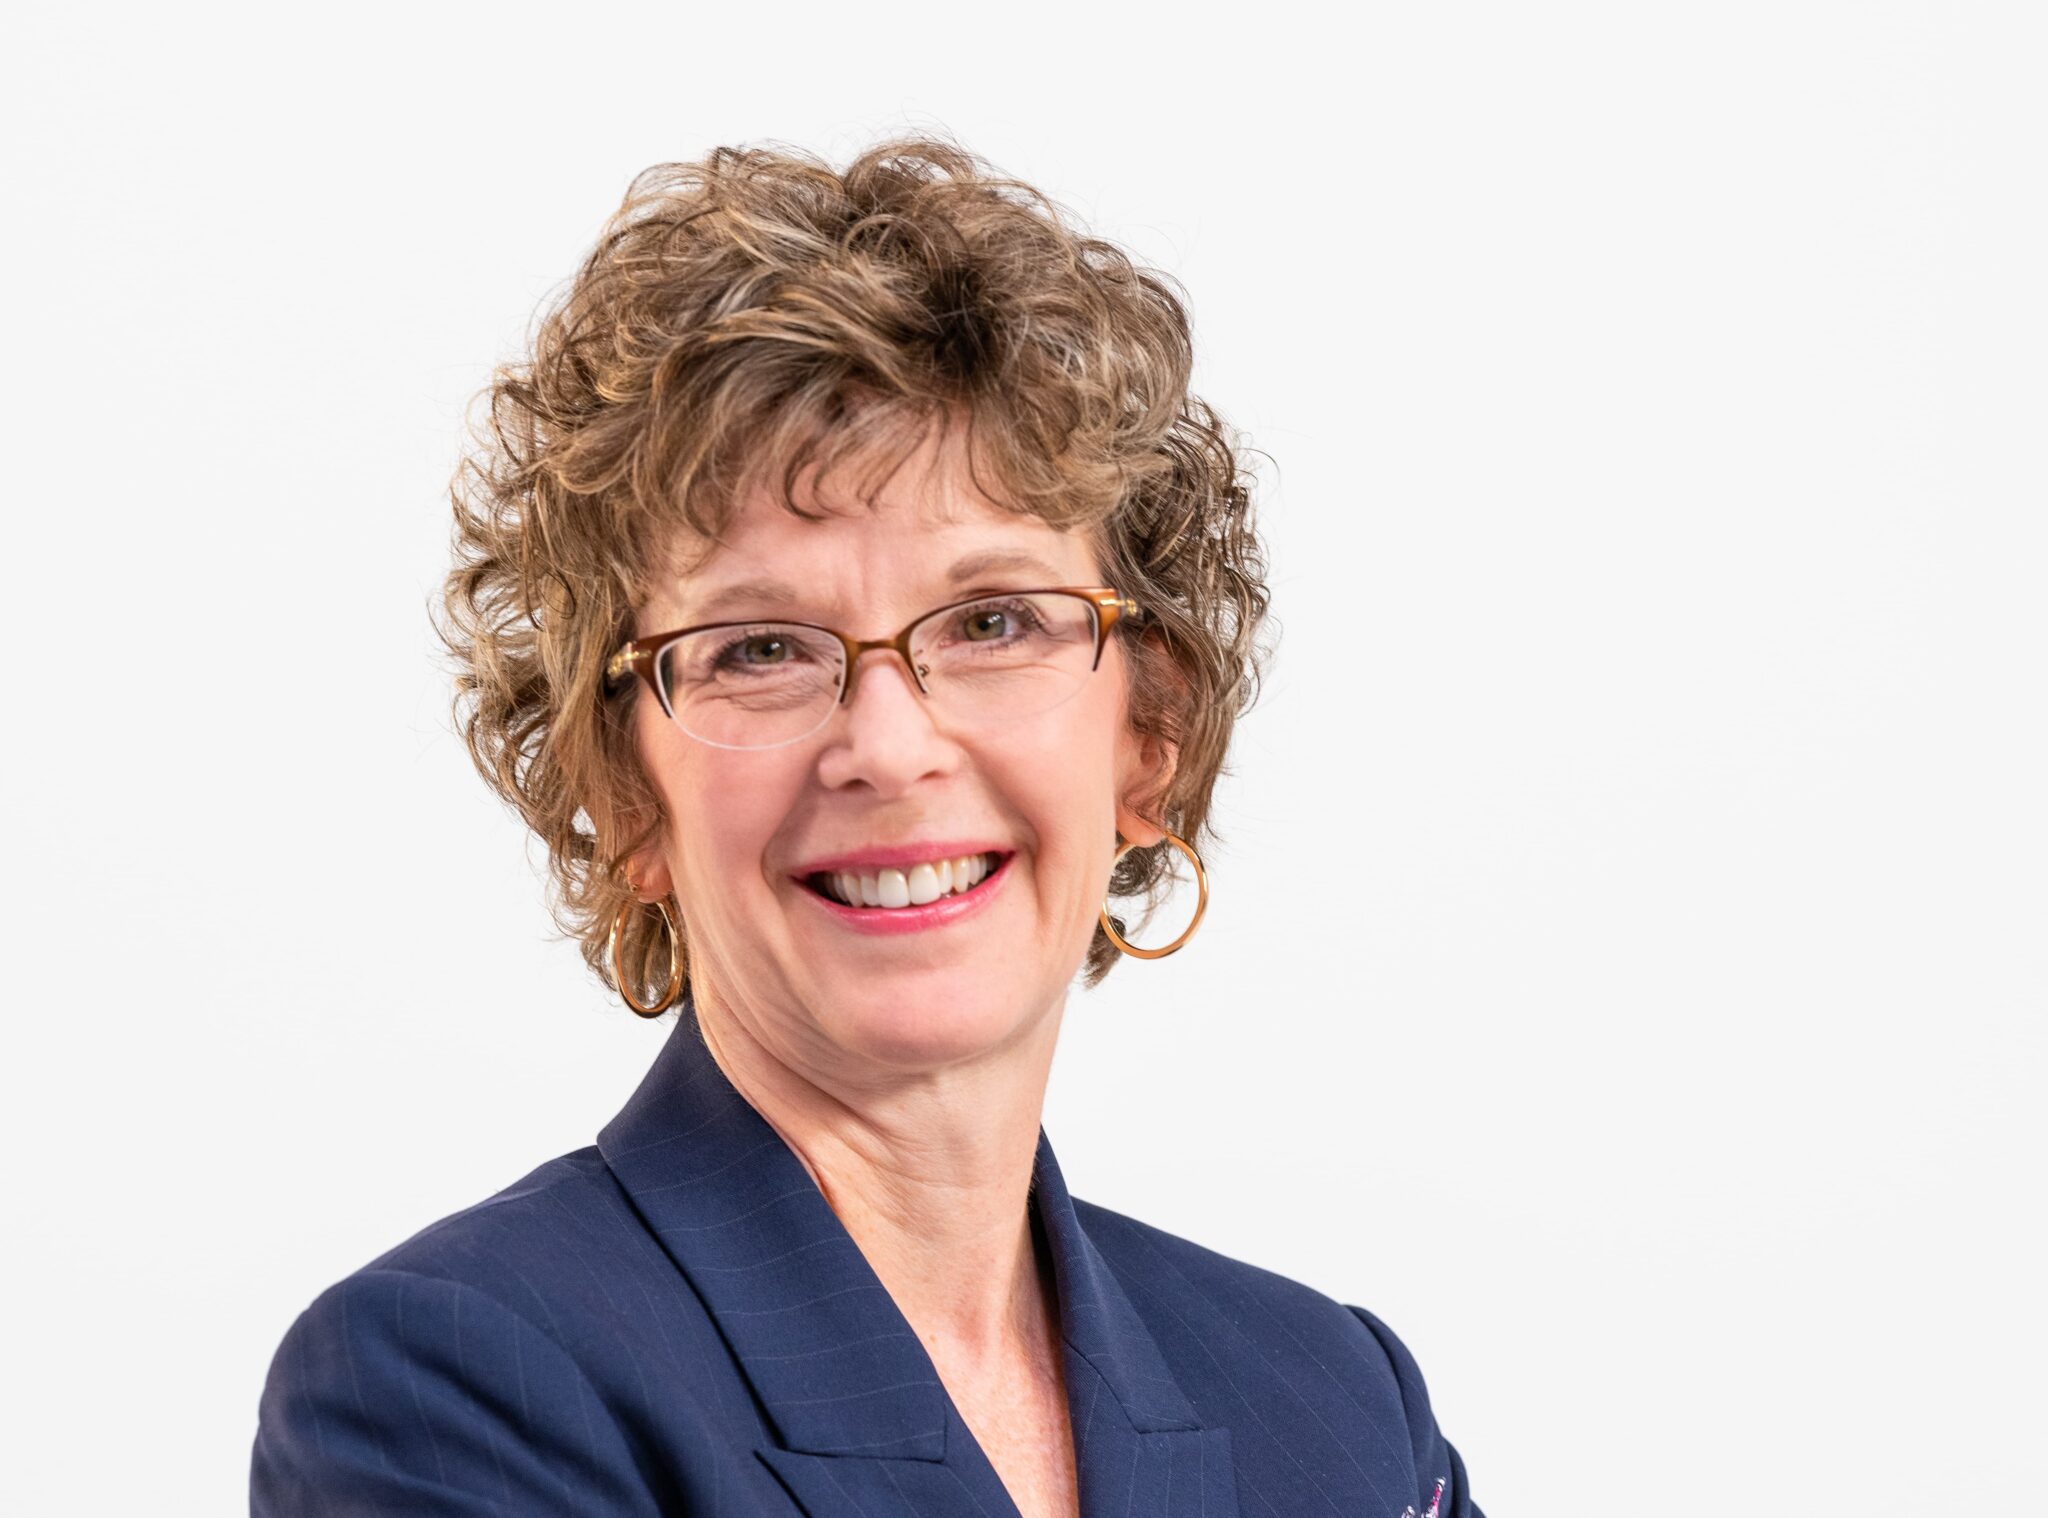 ArcBest CEO wins Women In Trucking Association’s 2019 Distinguished Woman in Logistics Award